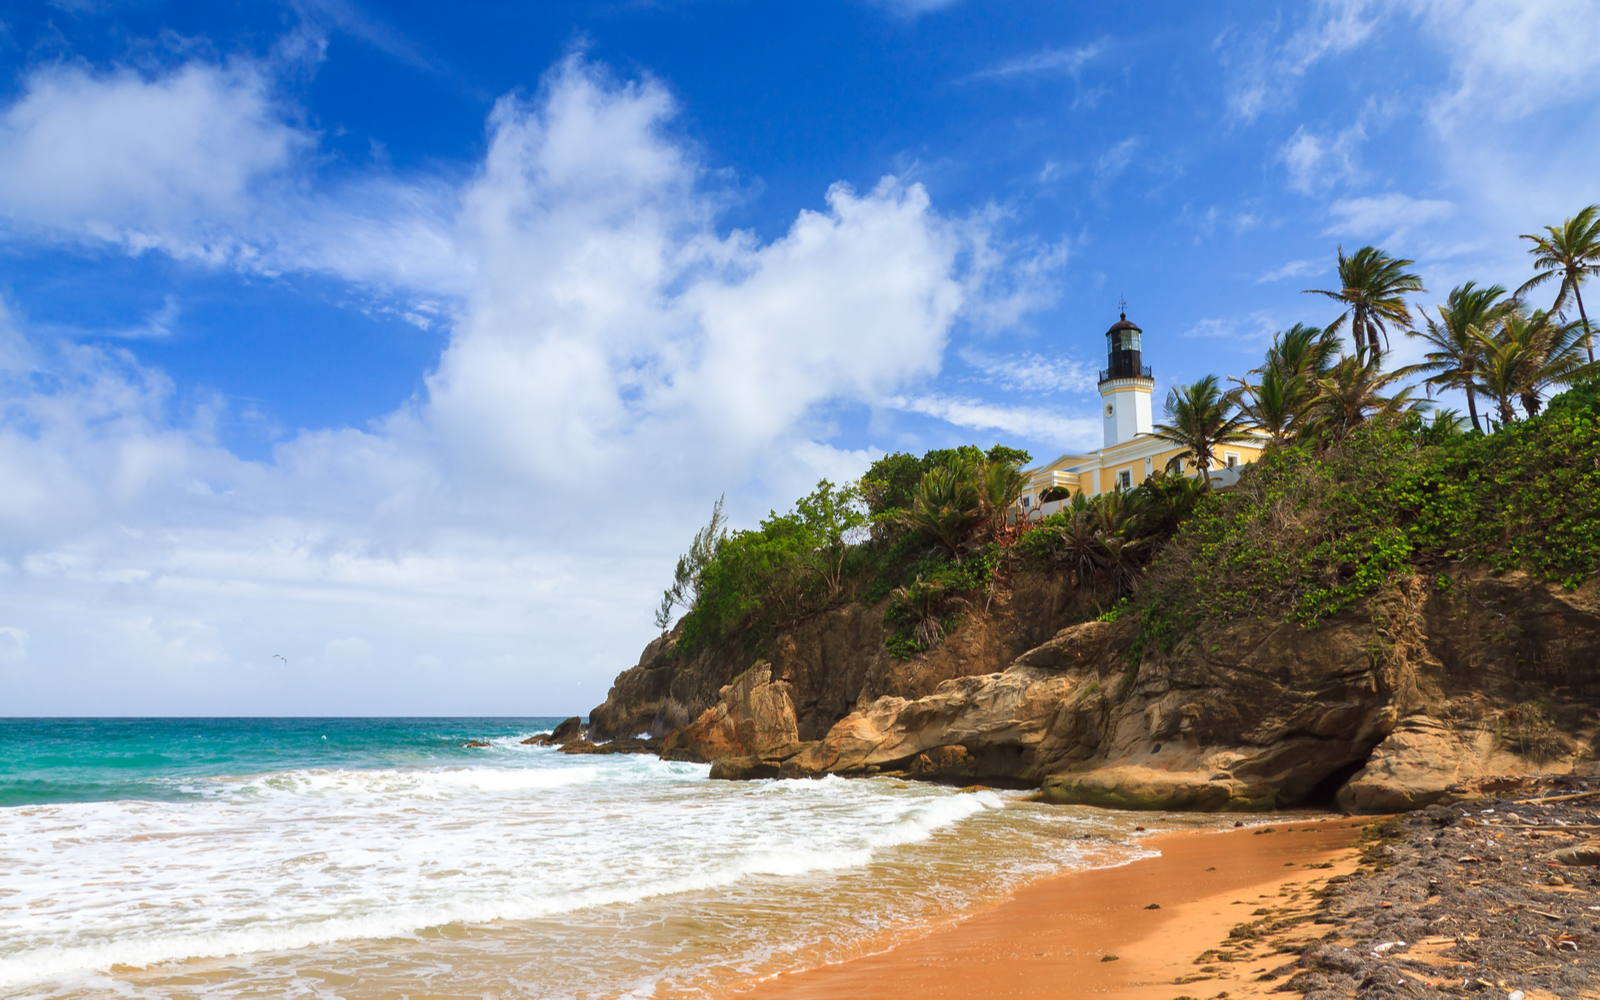 Punta Tuna lighthouse overlooking a top pick for the best beach in Puerto Rico